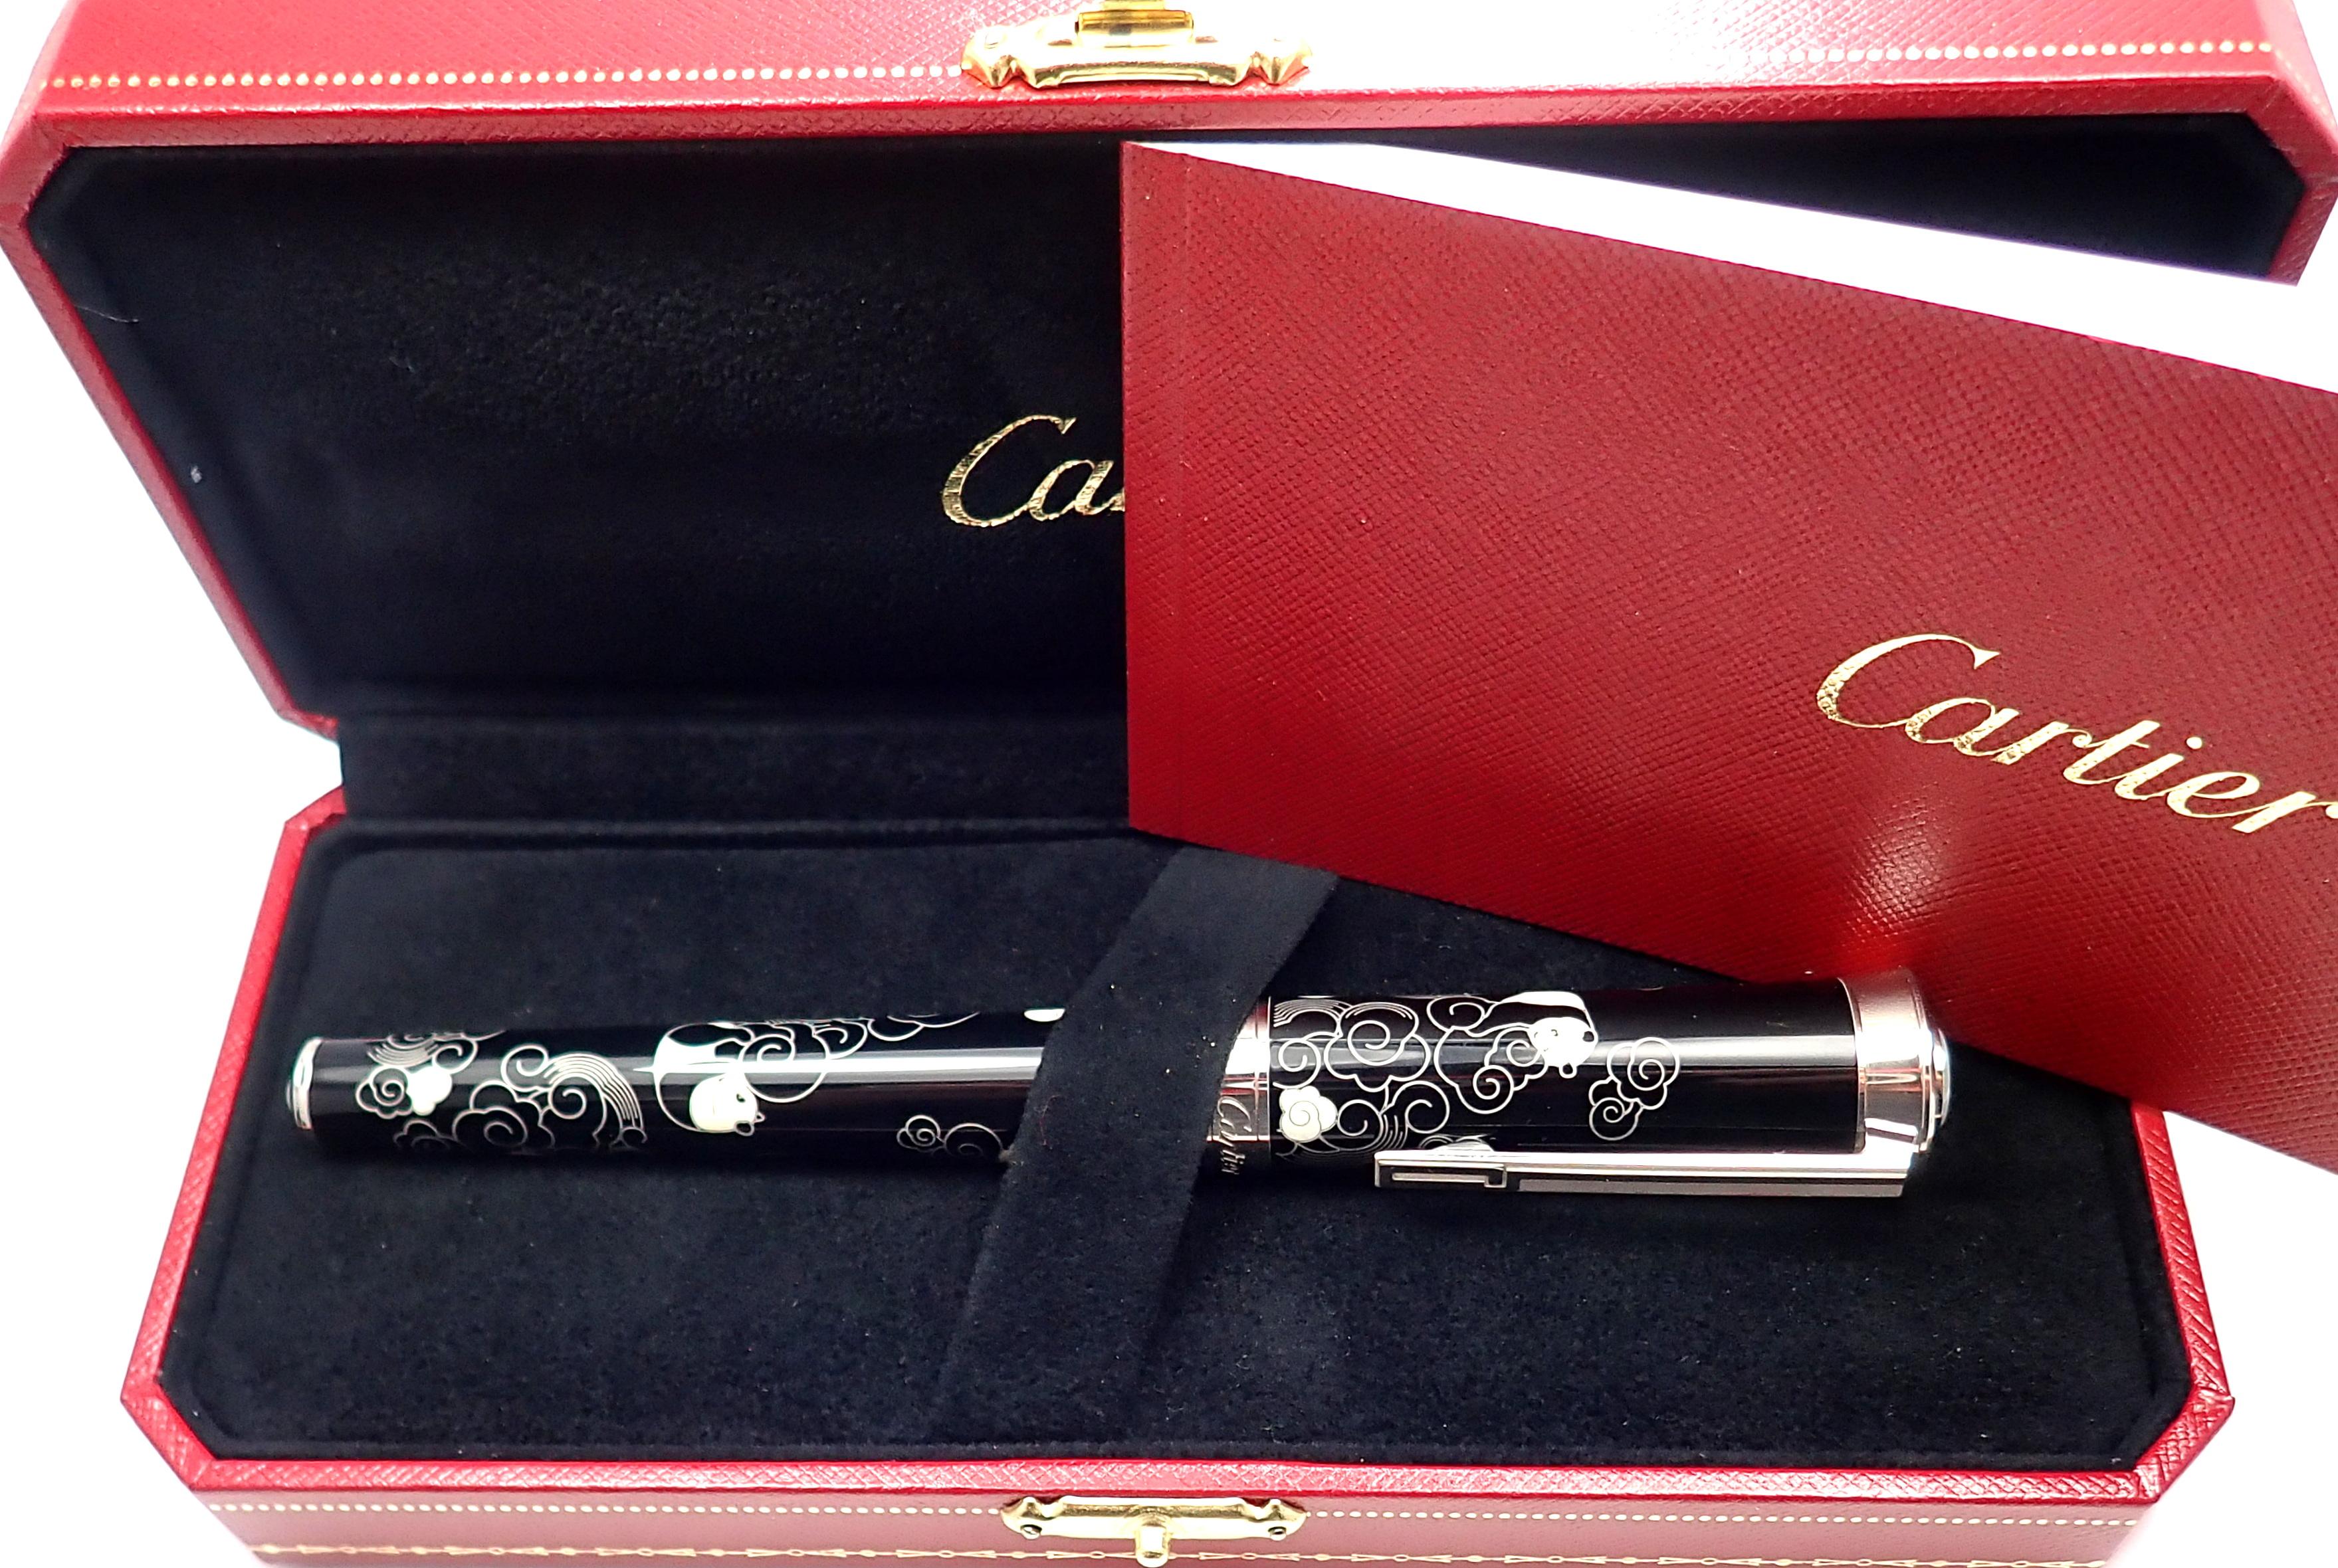 Palladium Art Deco Lacquer Fountain Limited Edition Pen by Cartier.
With Pen Box and Booklet.
Details:
Pen Length: 146mm
Pen Length w/o Cap: 133mm
Cap Length: 63mm
Pen Width: 19mm
Weight: 87 grams
Limited Edition: Number 167 out of 888 ever